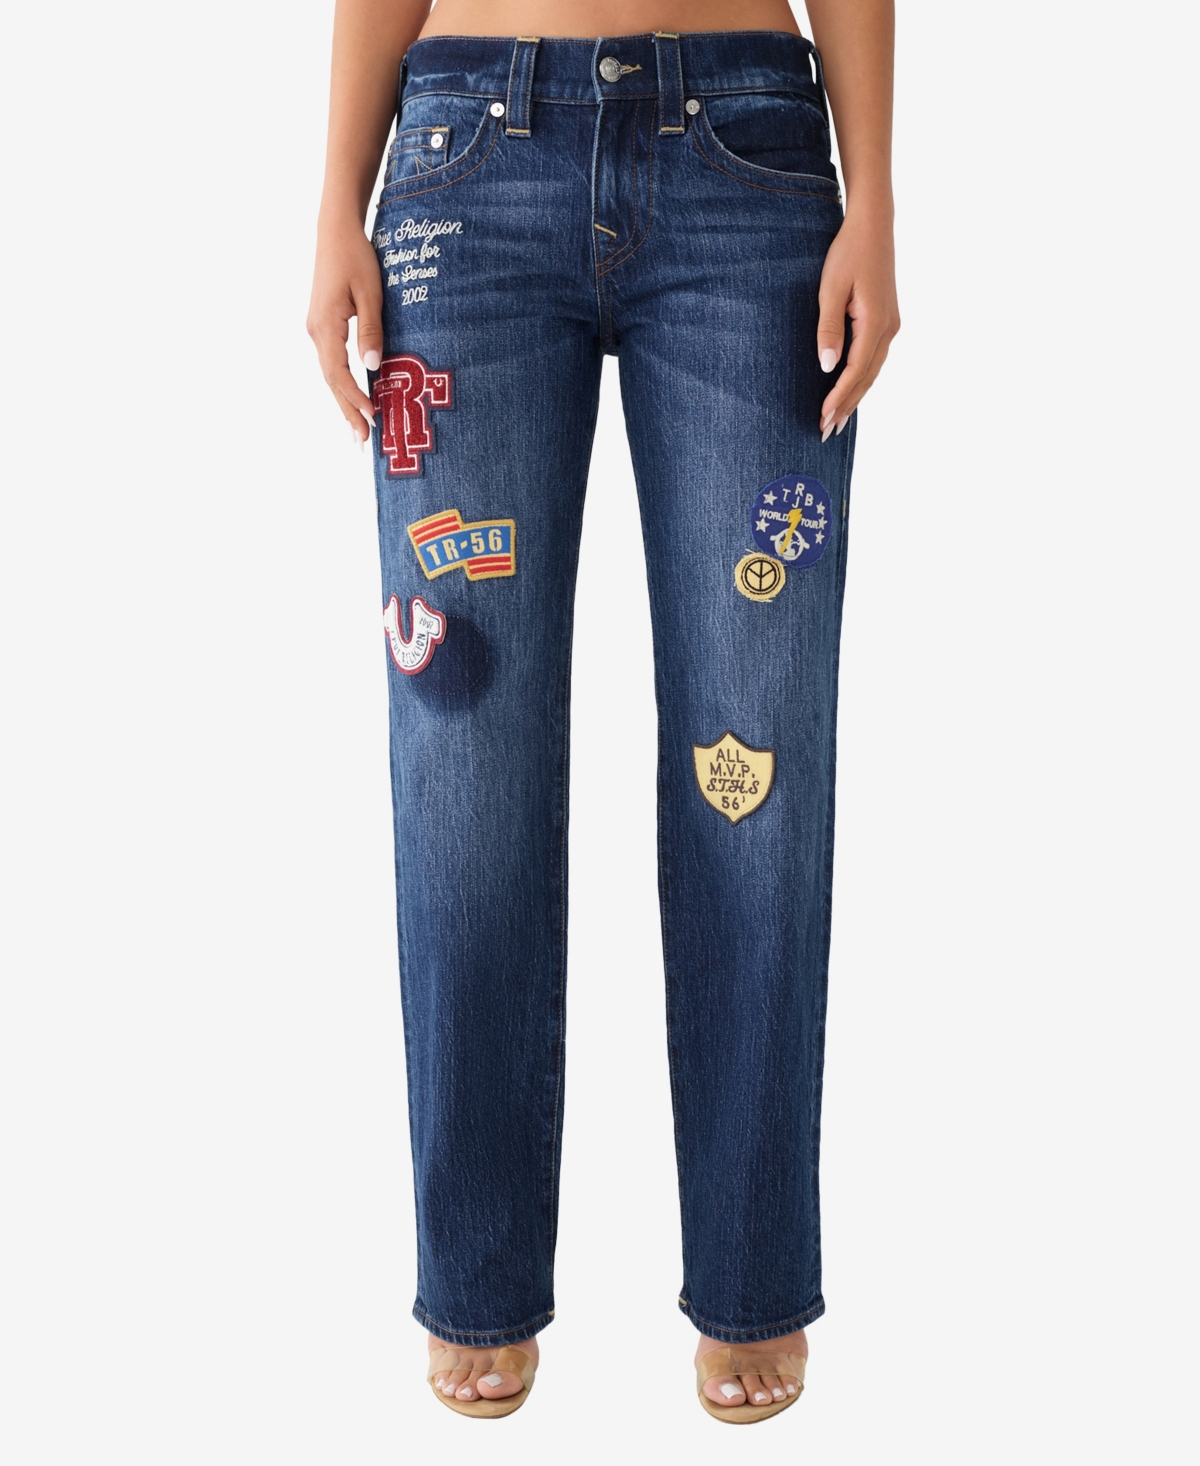 Women's Ricki Straight Jeans with Patches - Crystal Cove